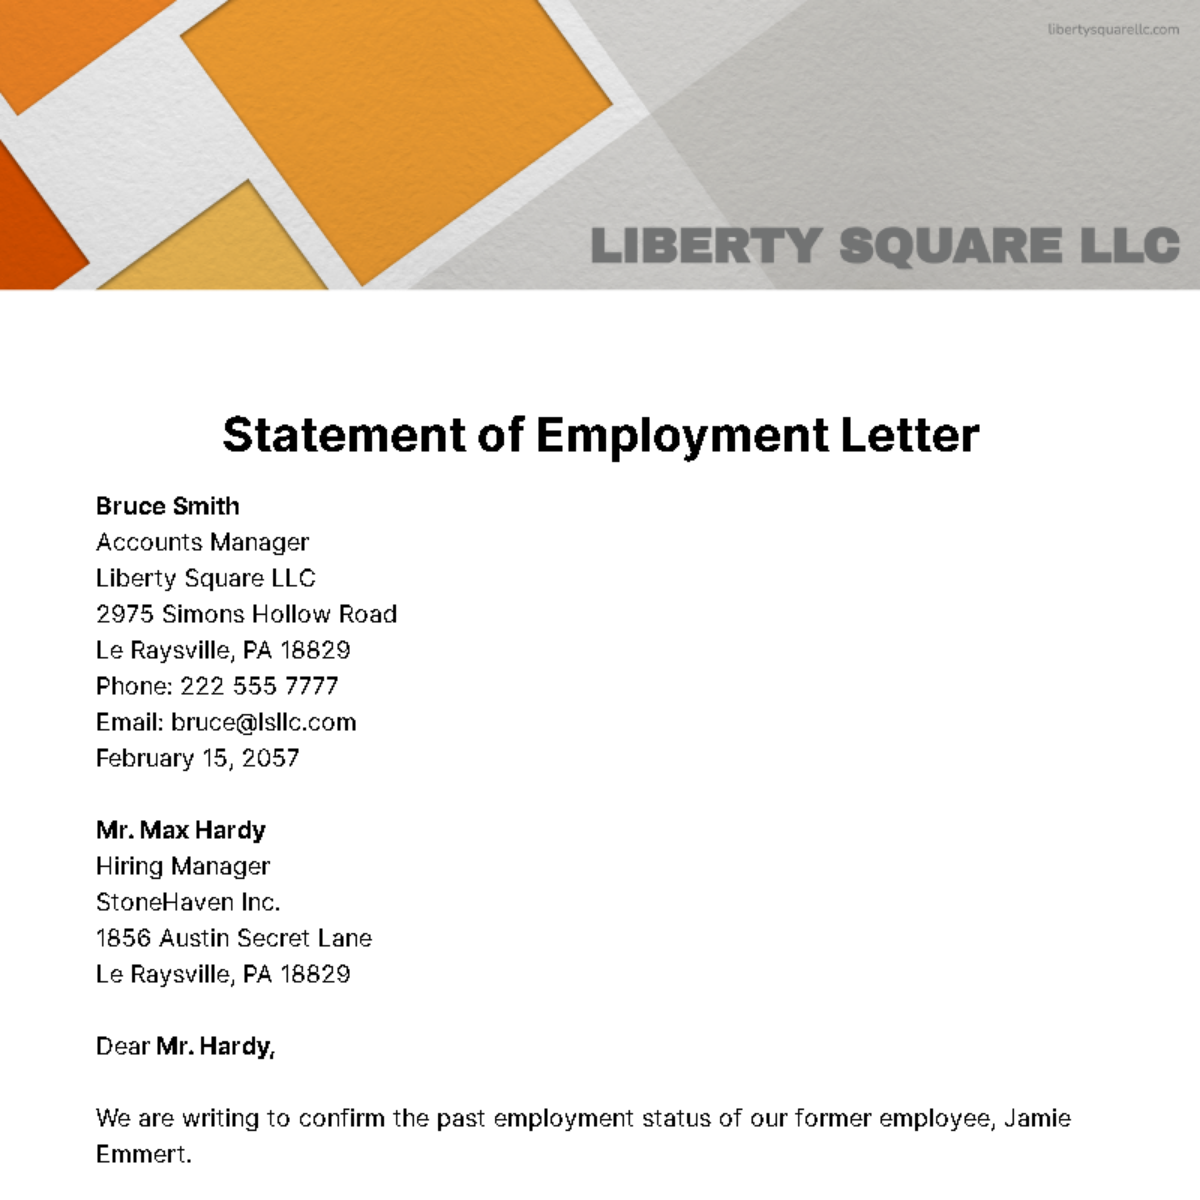 Statement of Employment Letter Template